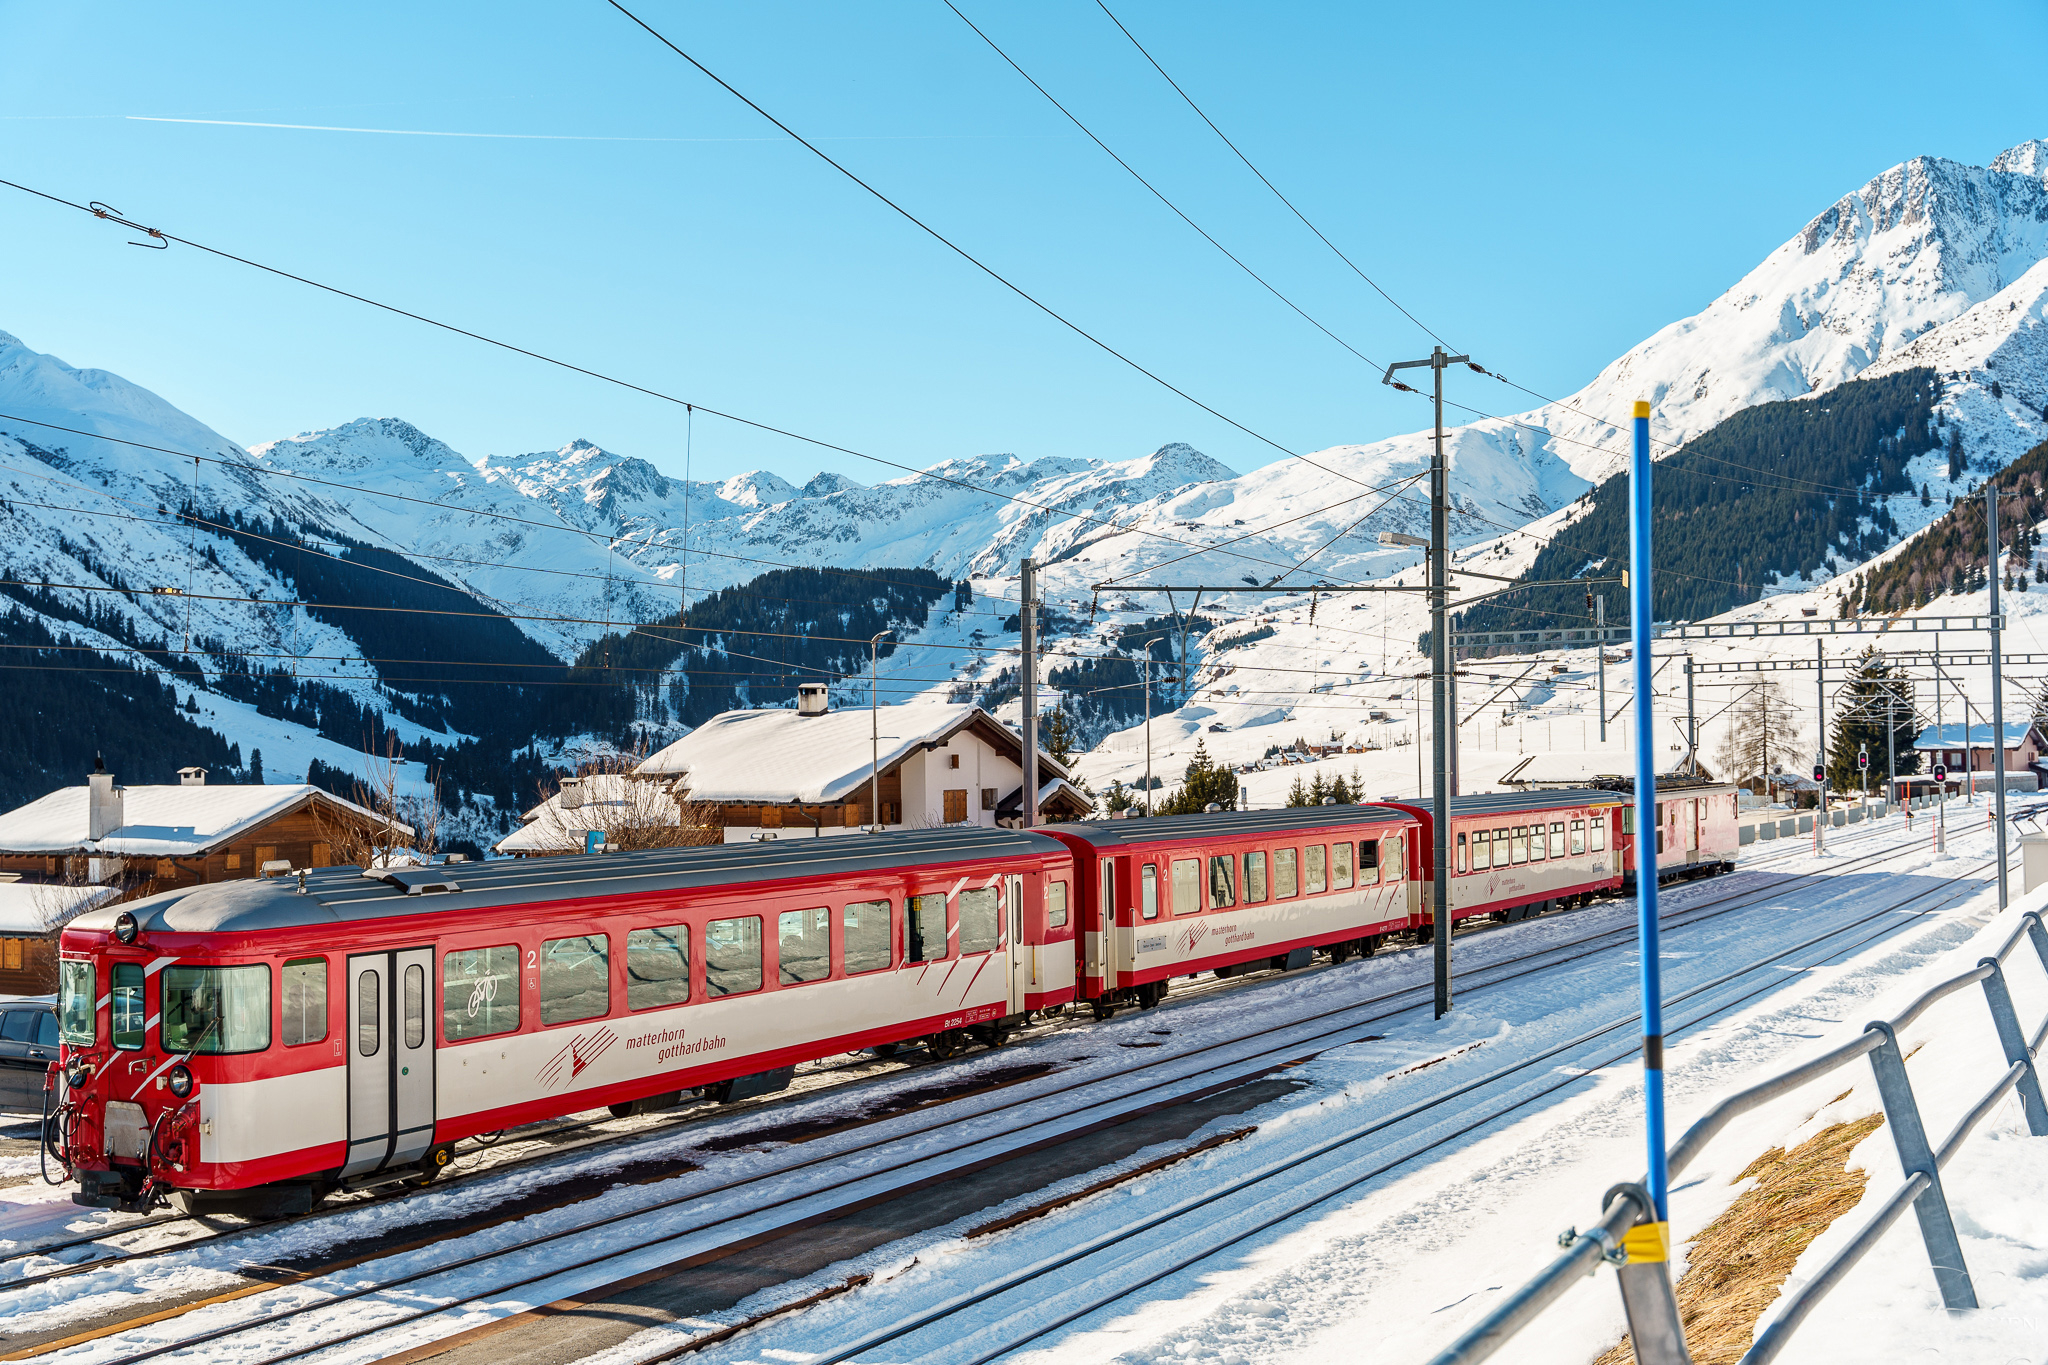 Train waiting at the station in Sedrun